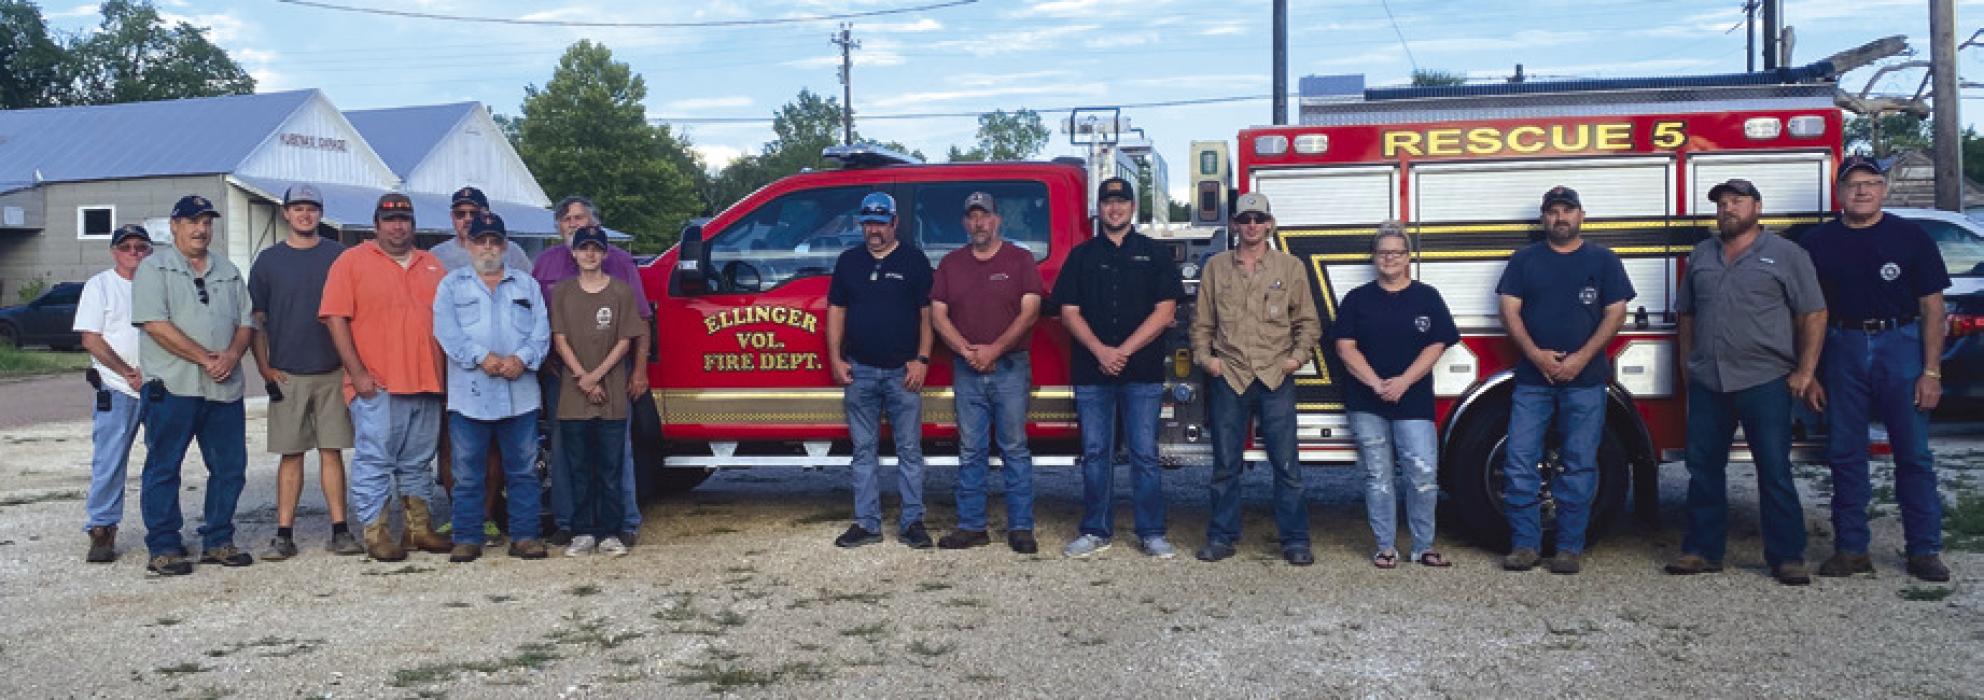 Ellinger Volunteer Fire Department Takes Delivery of New Rescue Truck